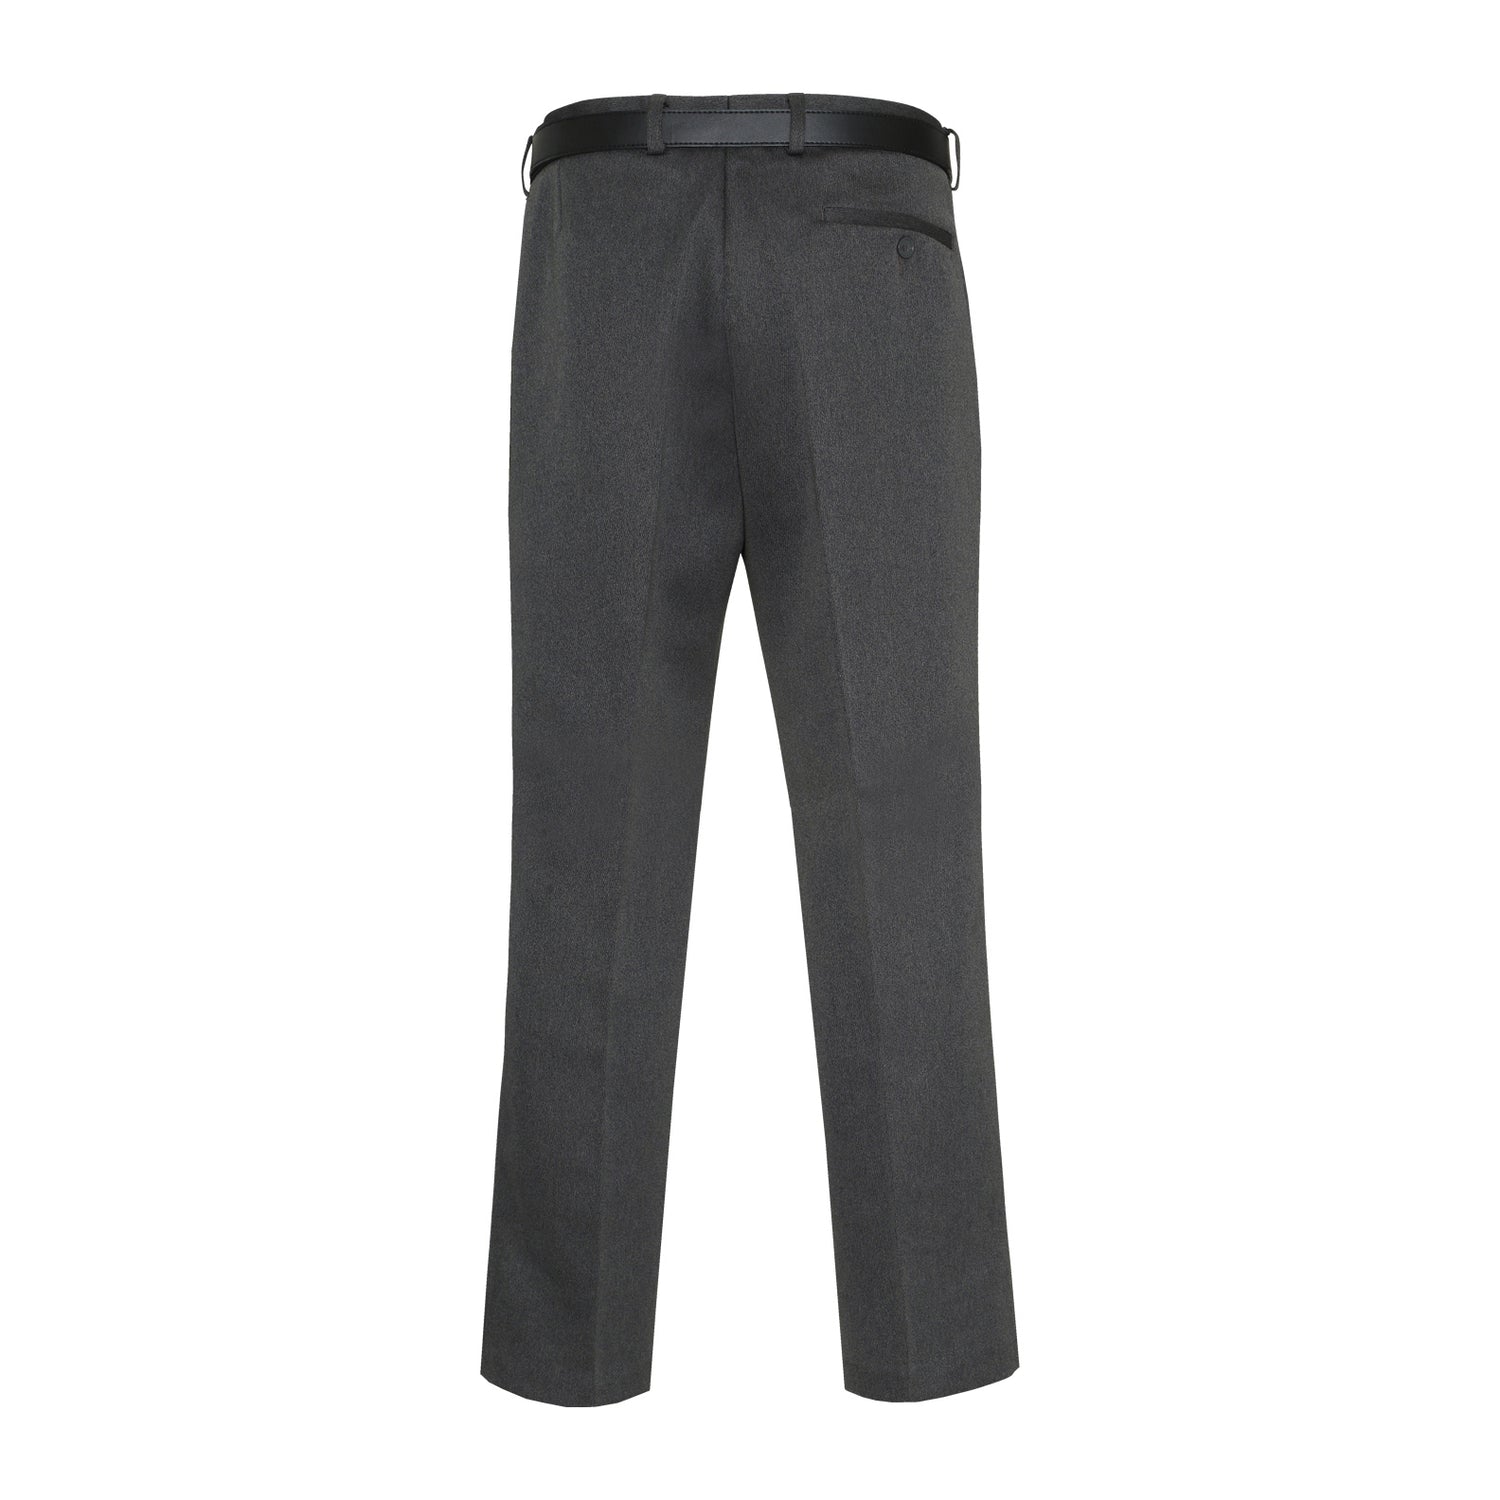 Cavalry Twill Trousers, Charcoal / 34 / 31 | New Forest Clothing